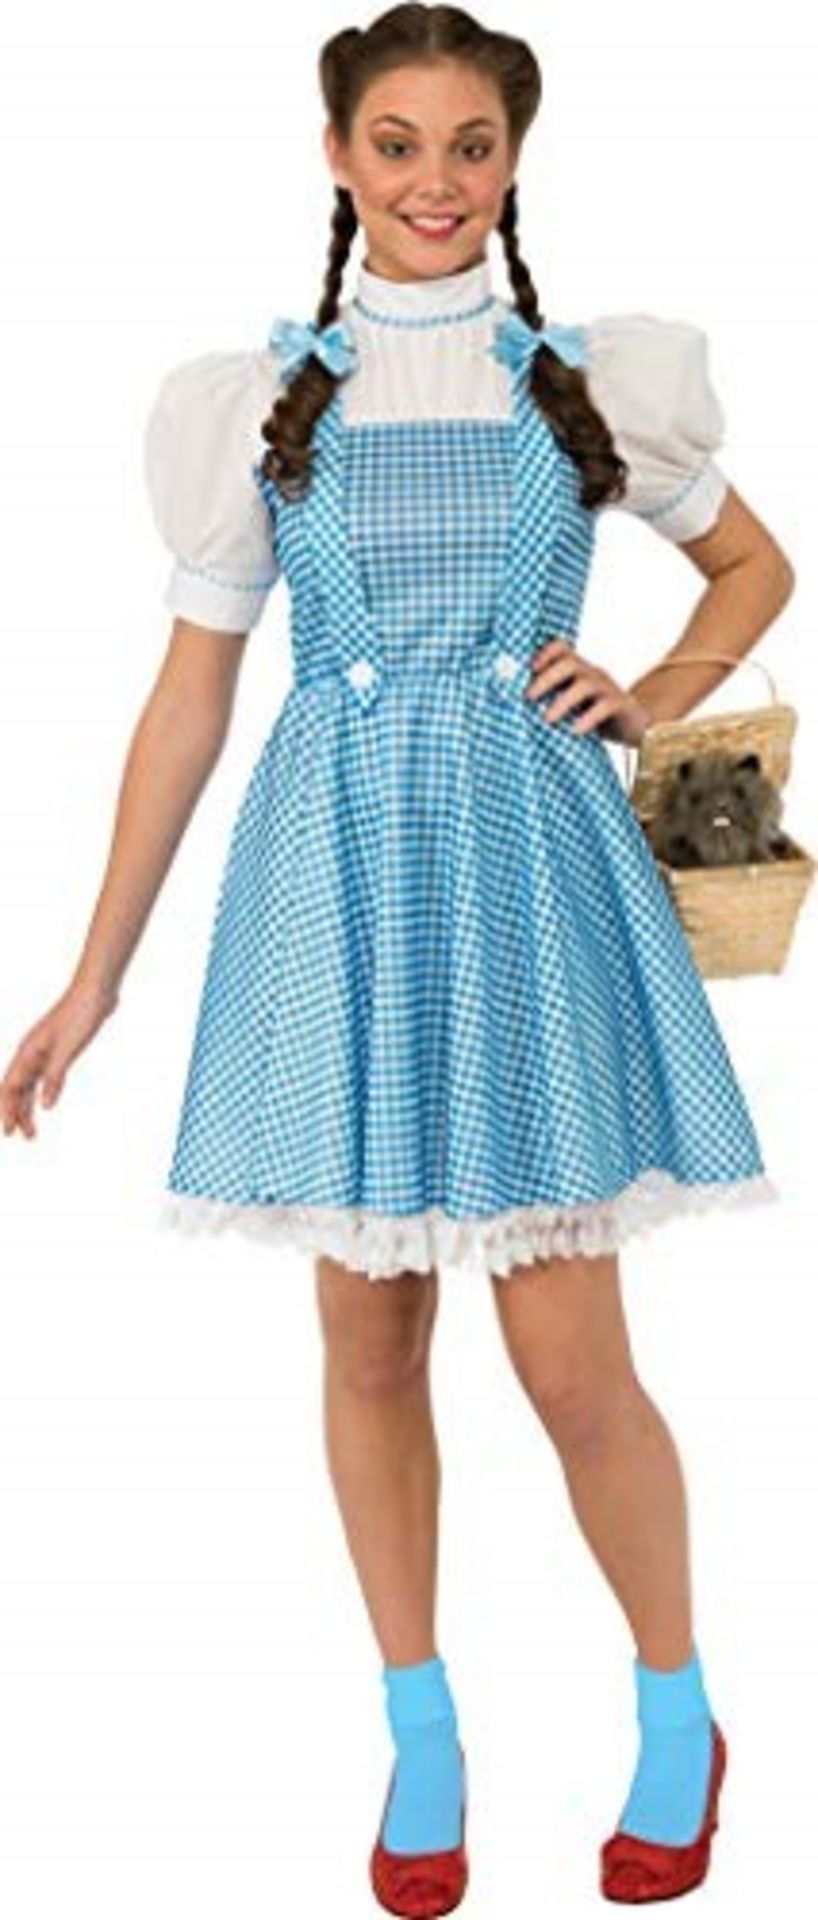 Rubie's Official 887378 Wizard of Oz - Dorothy Costume - Teen - Blue/white